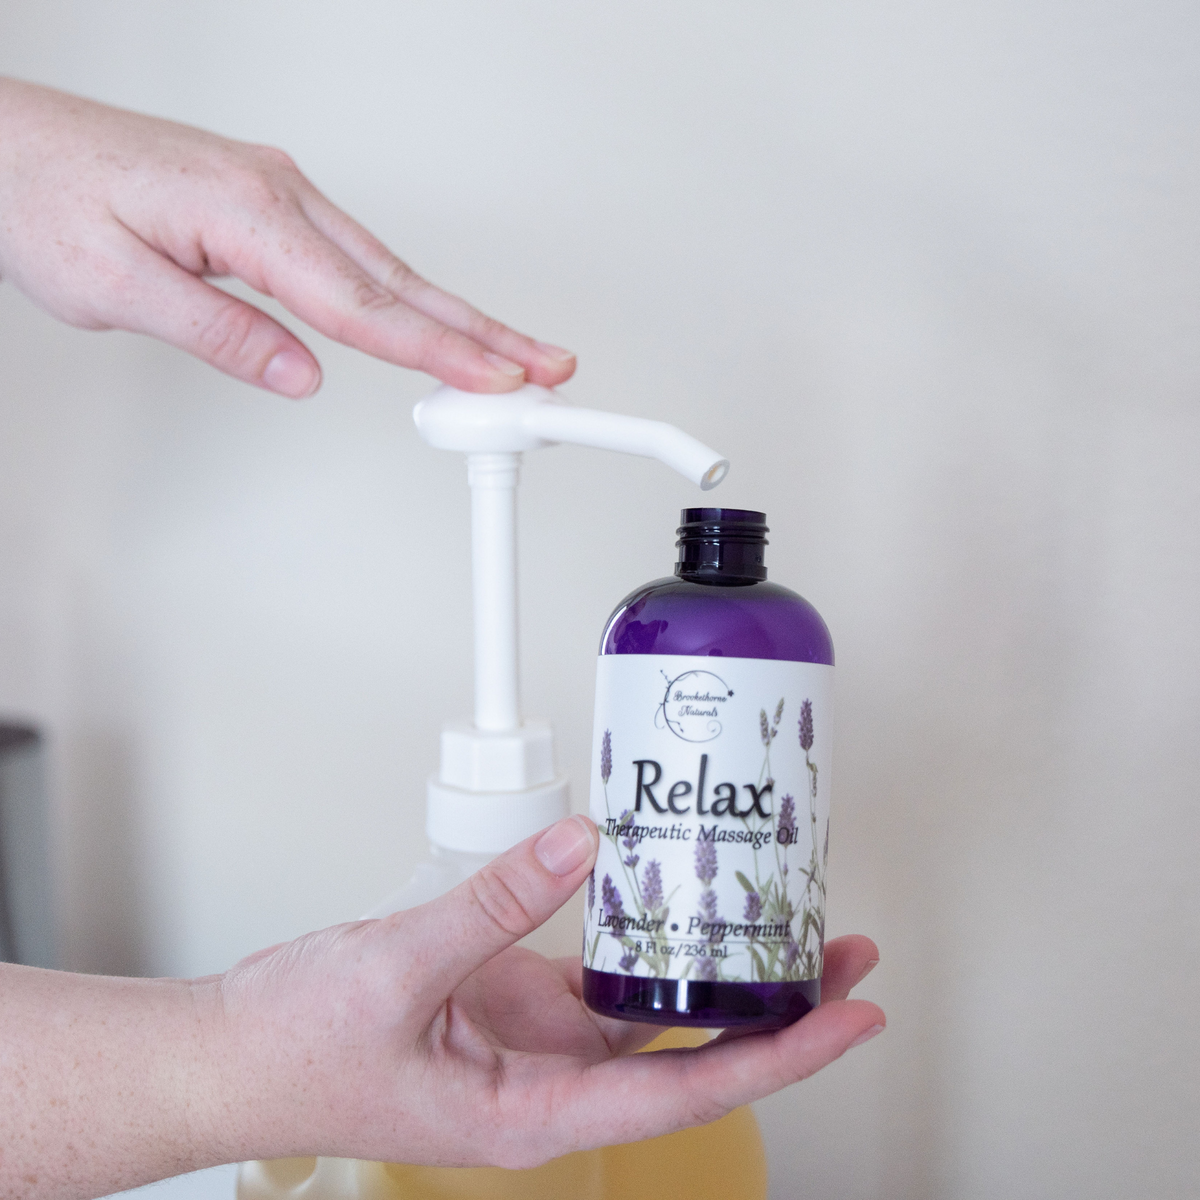 Relax Therapeutic Massage Oil being pumped from a gallon jug into an 8oz bottle